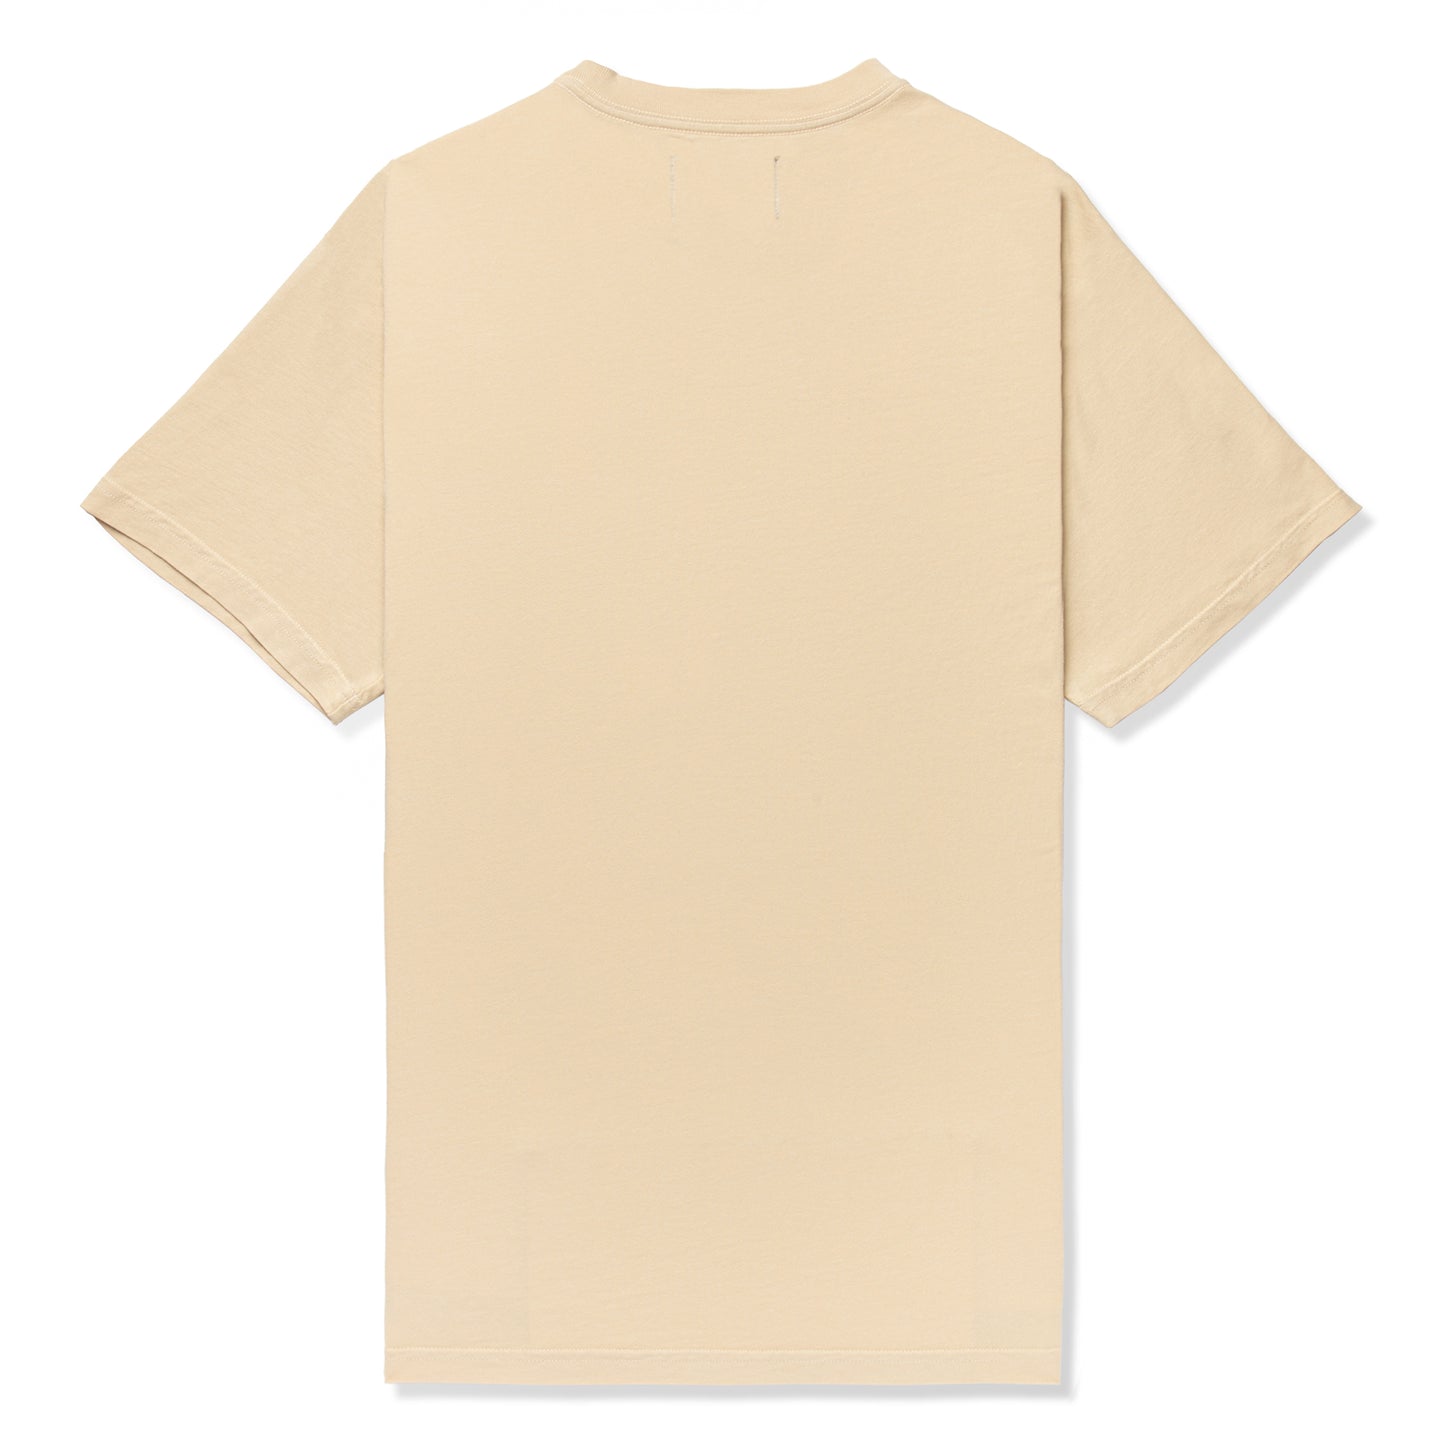 Concepts Cosmo's Tee (Flan)